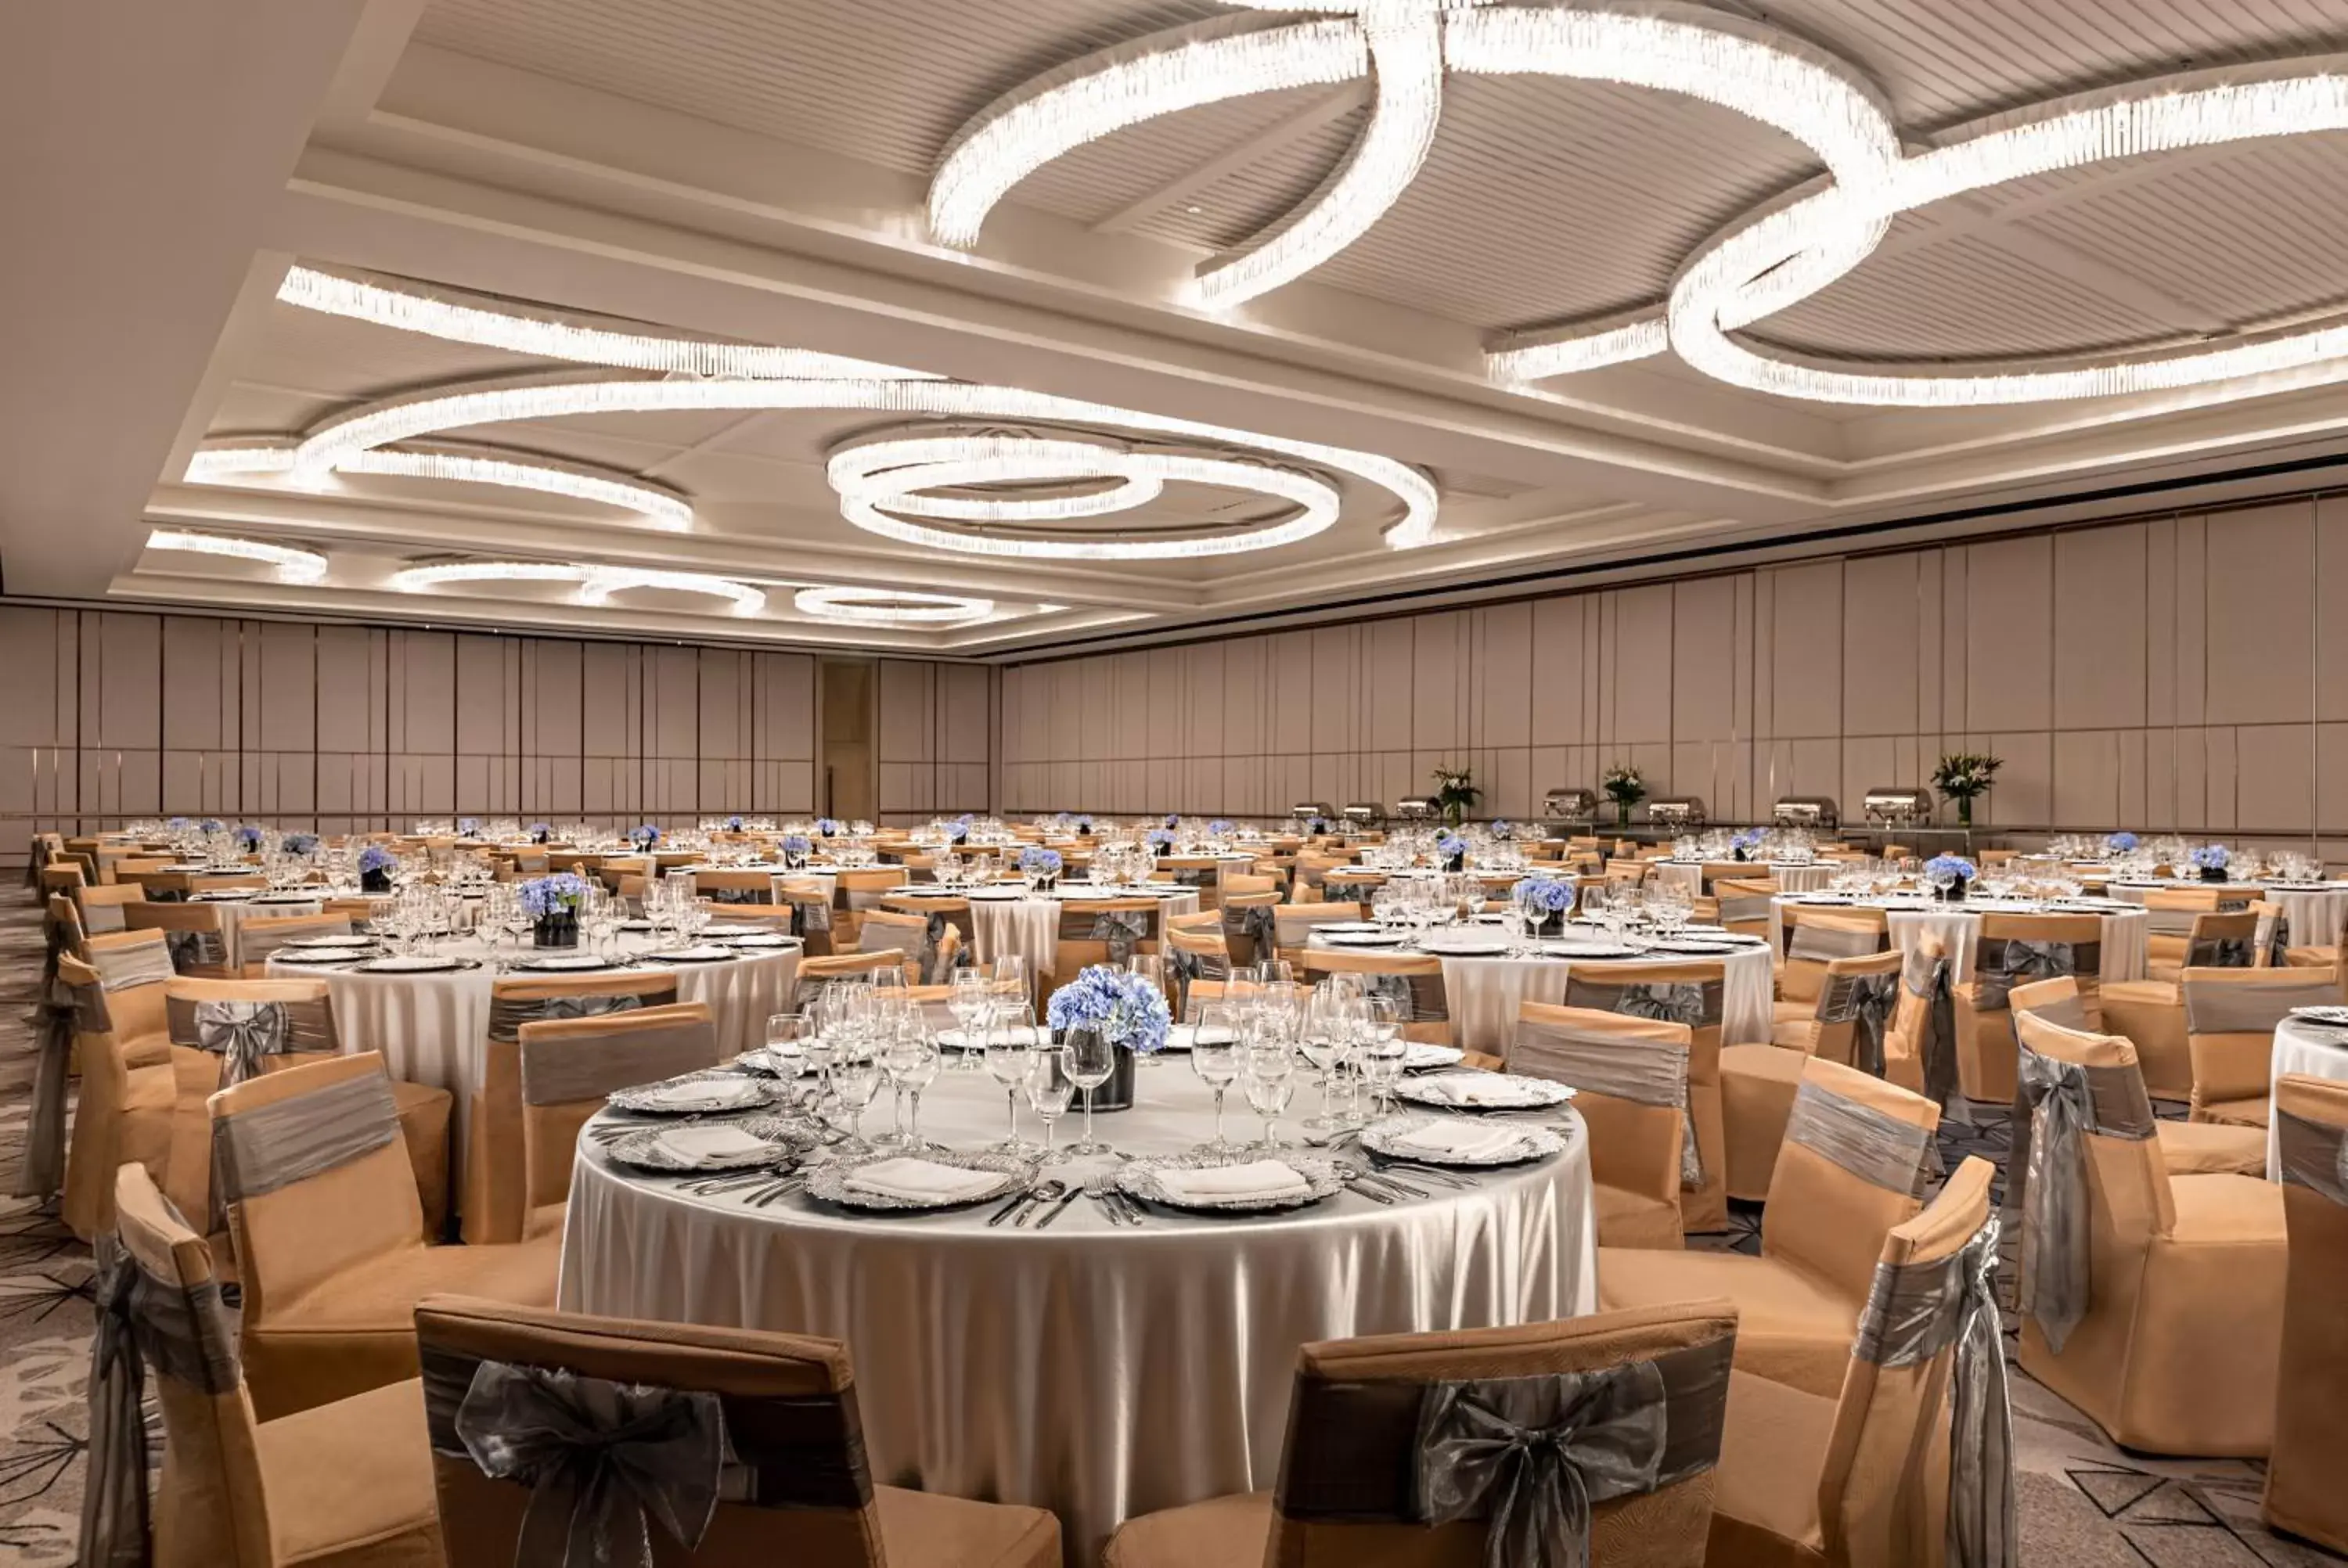 Business facilities, Banquet Facilities in dusitD2 Davao